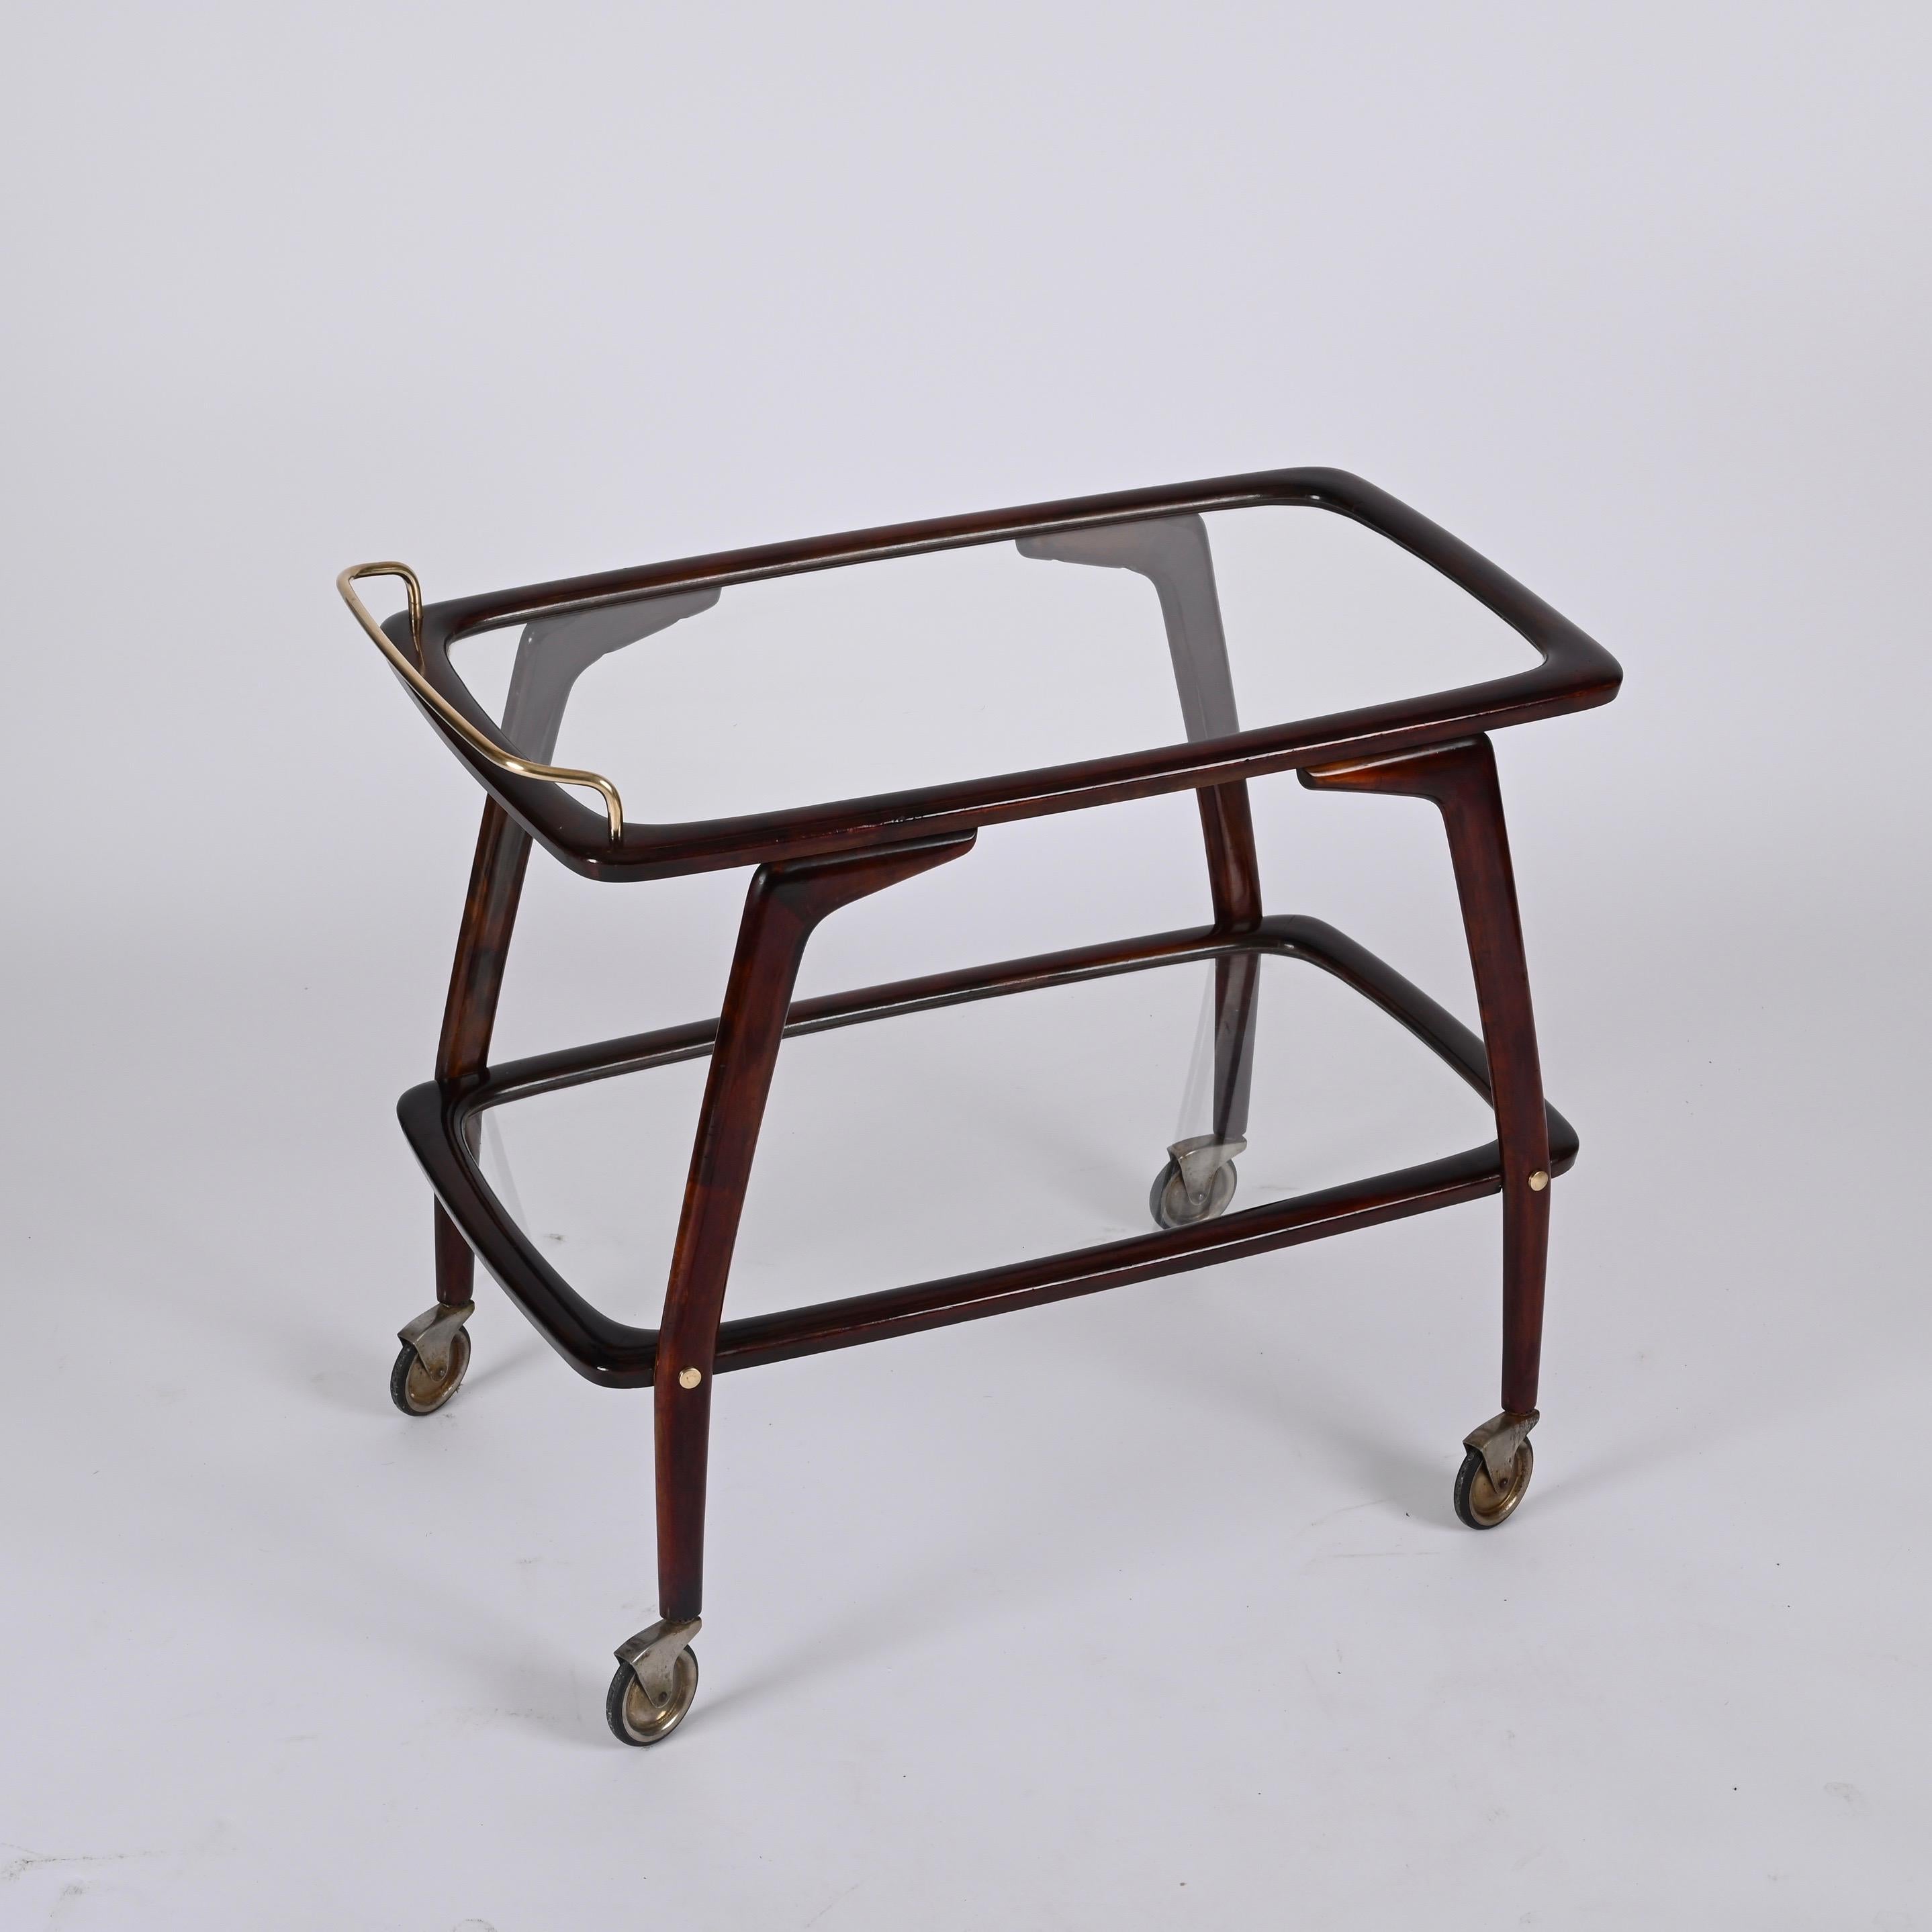 Amazing midcentury beech wood and brass bar cart. Cesare Lacca probably designed this fantastic piece in Italy during the 1950s.

This item is extremely elegant thanks to its brass handle and the composition of its structure: two tiers of brass